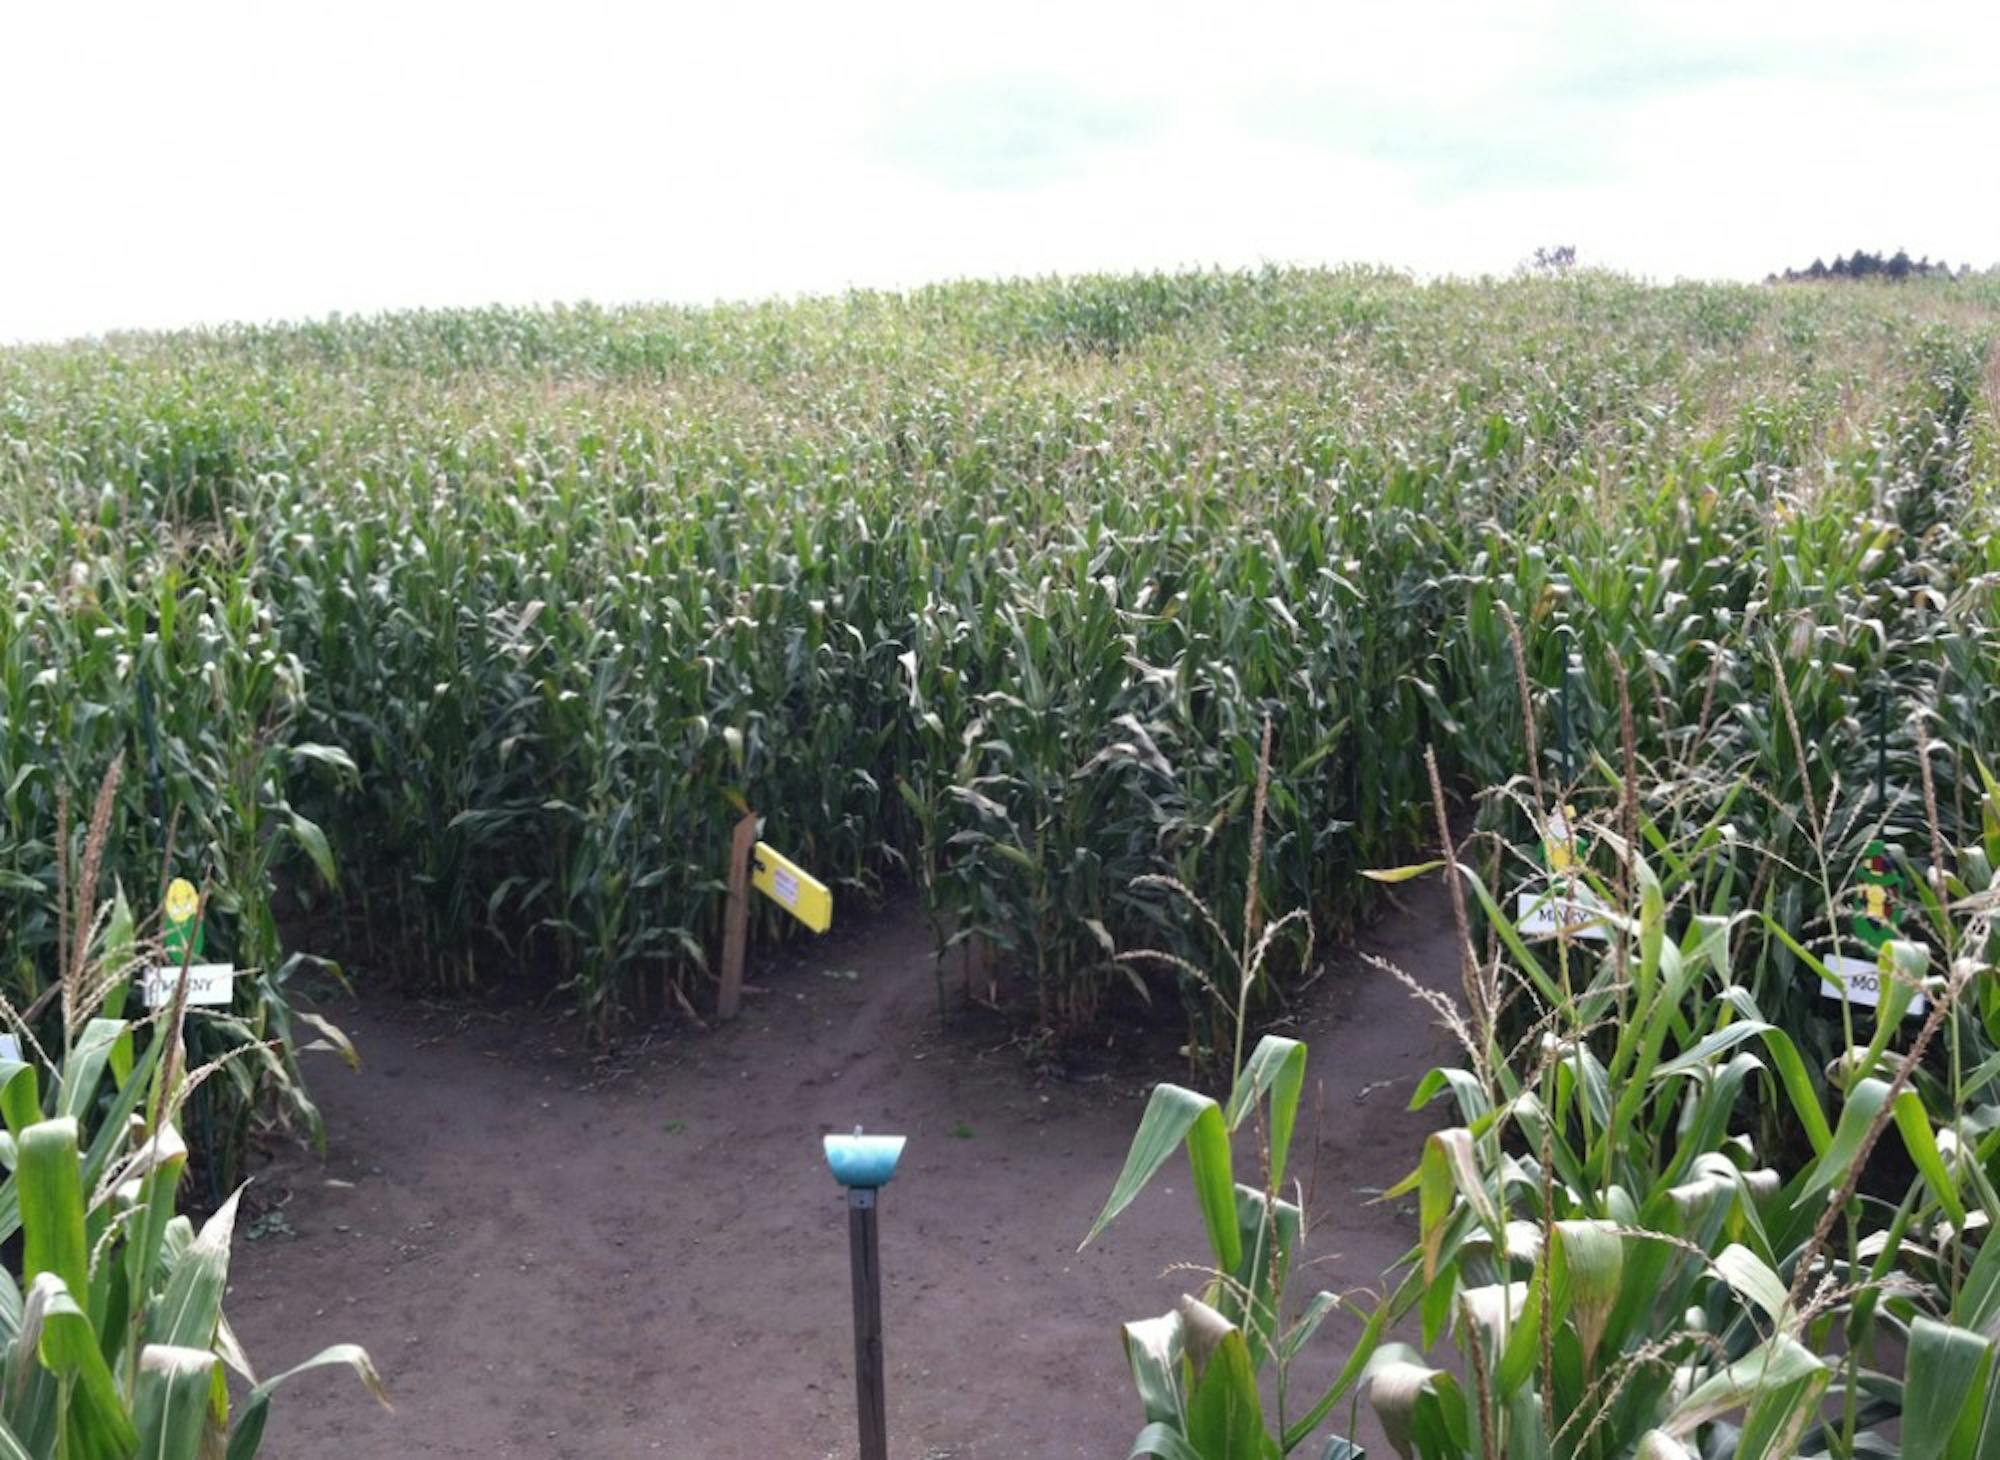 The Great Vermont Corn Maze is one of multiple maize-themed attractions in the Upper Valley available for students who wish to get lost off campus. 